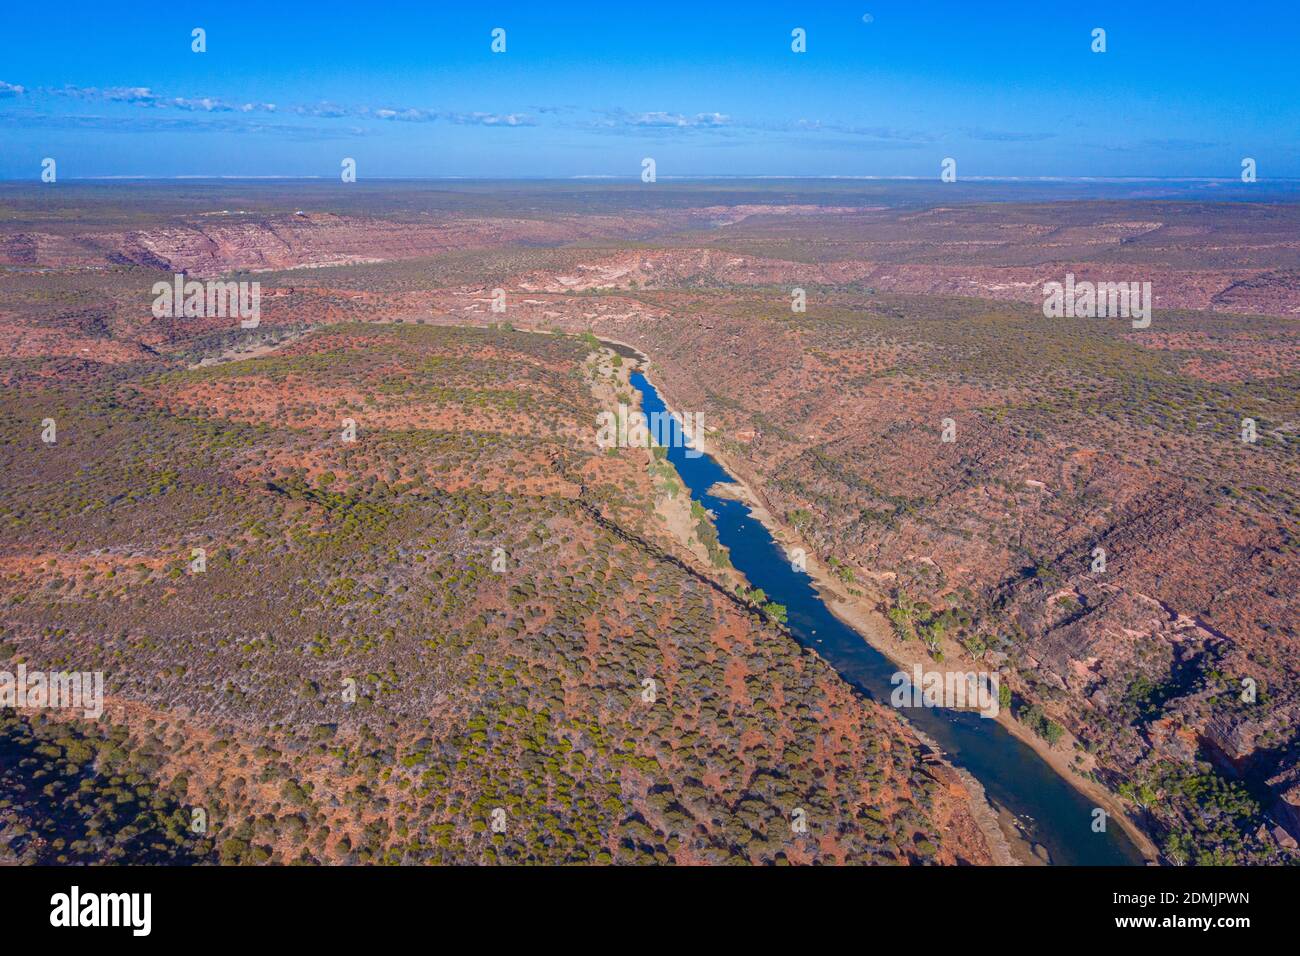 Aerial view of Murchison river reaching the loop at Kalbarri national park in Australia Stock Photo